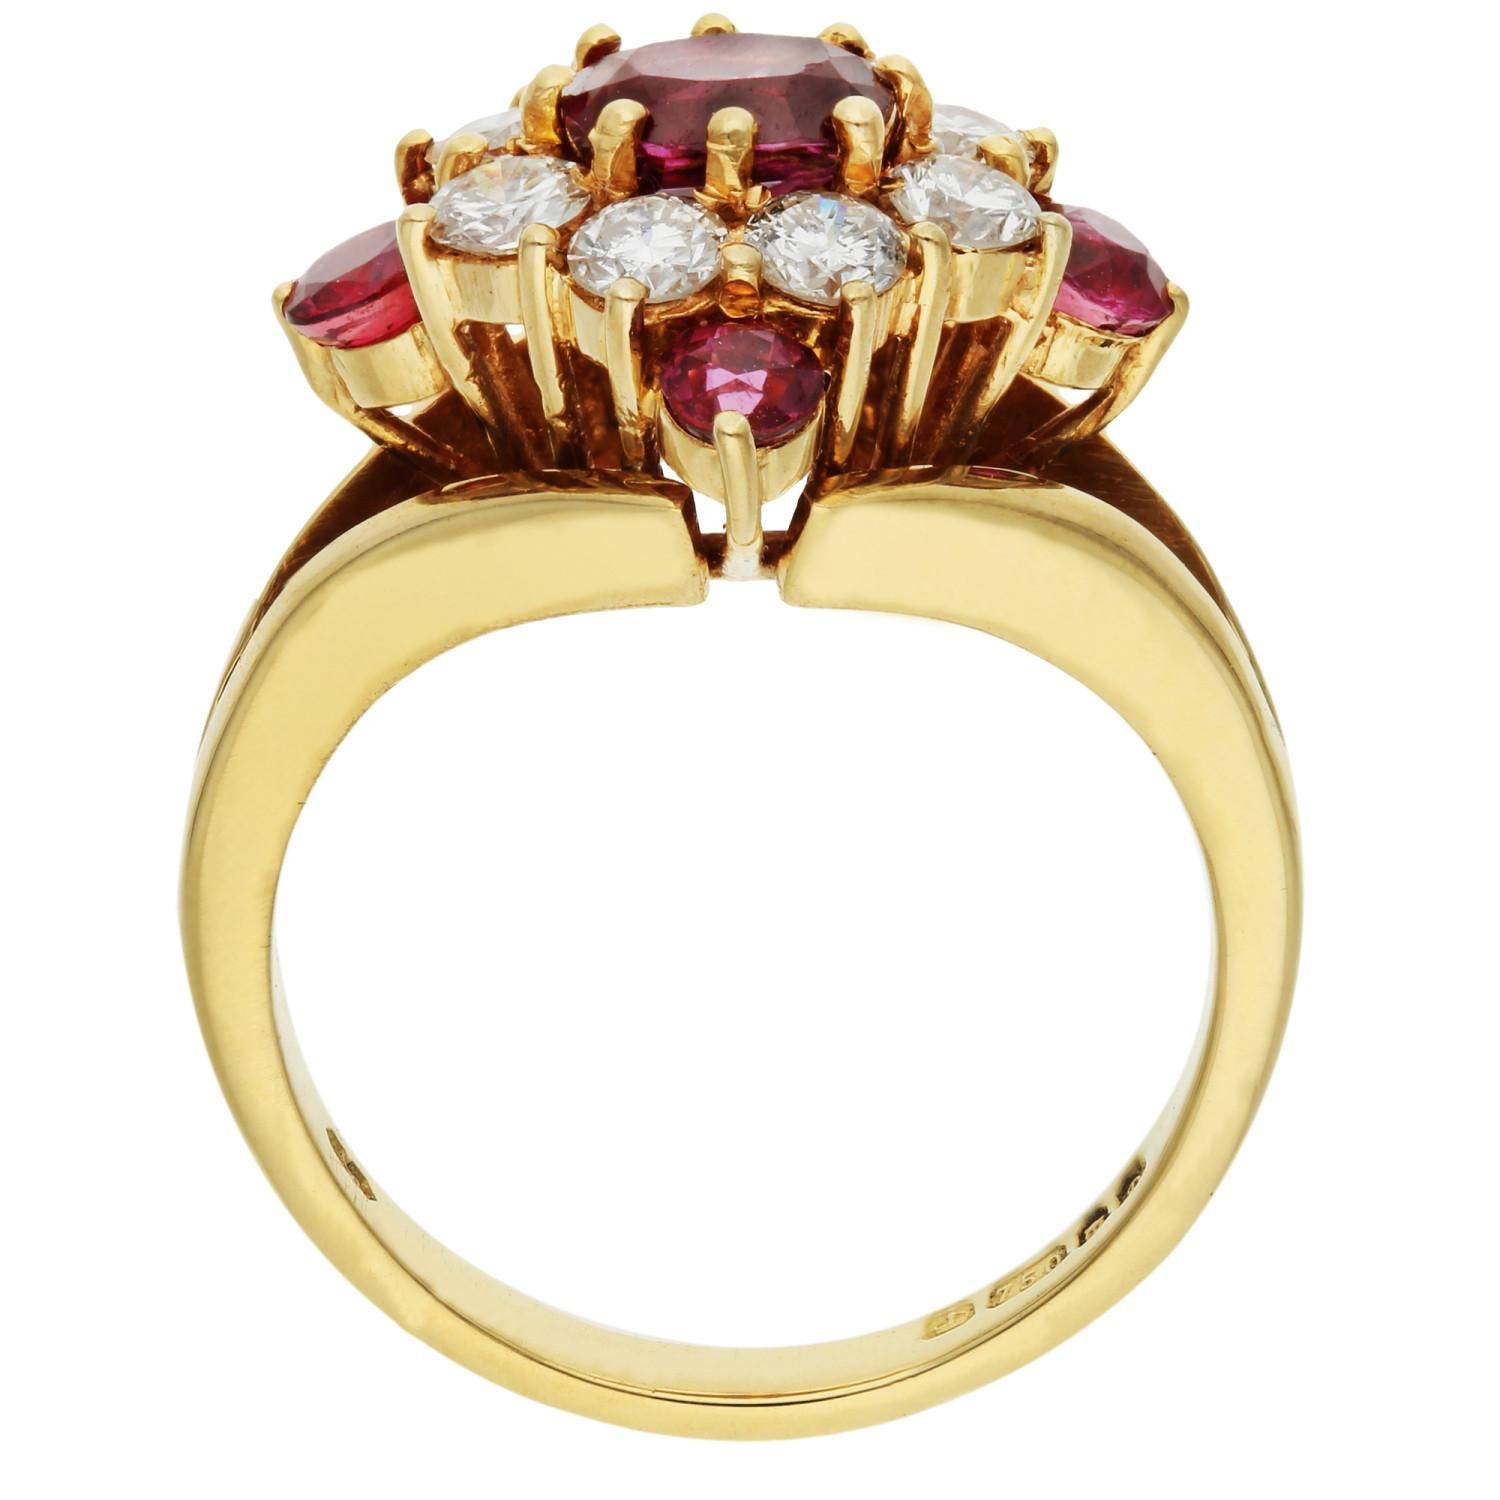 Elevate your style with our Pre-Loved 18ct Yellow Gold Ruby & Diamond Ring, a dazzling cluster of vibrant gemstones and exquisite design. At its heart, an alluring oval ruby takes centre stage, enveloped by a halo of round brilliant-cut diamonds,